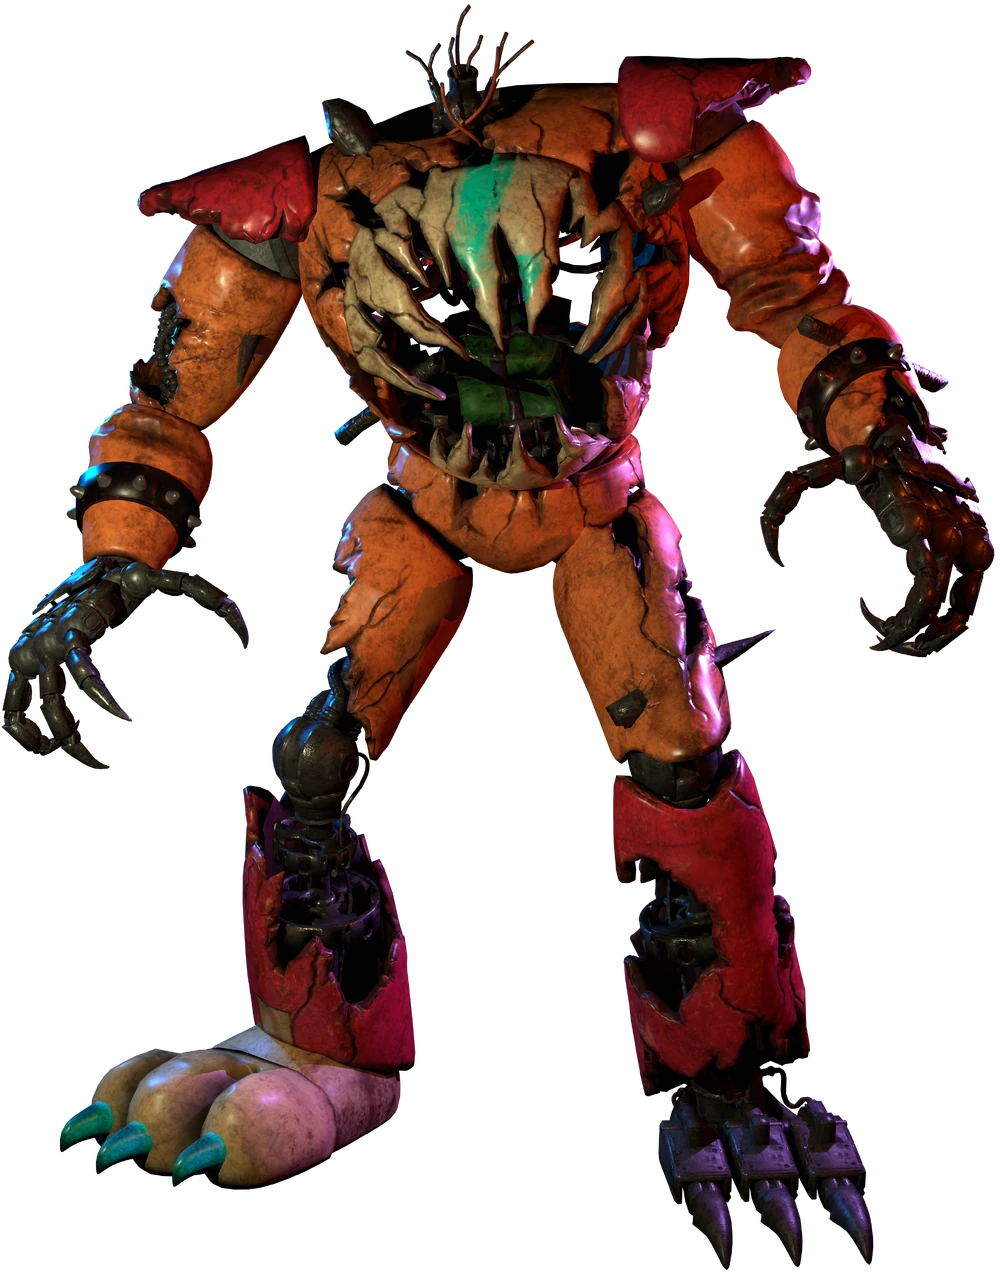 Gregory, Five Nights At Freddy's Wiki